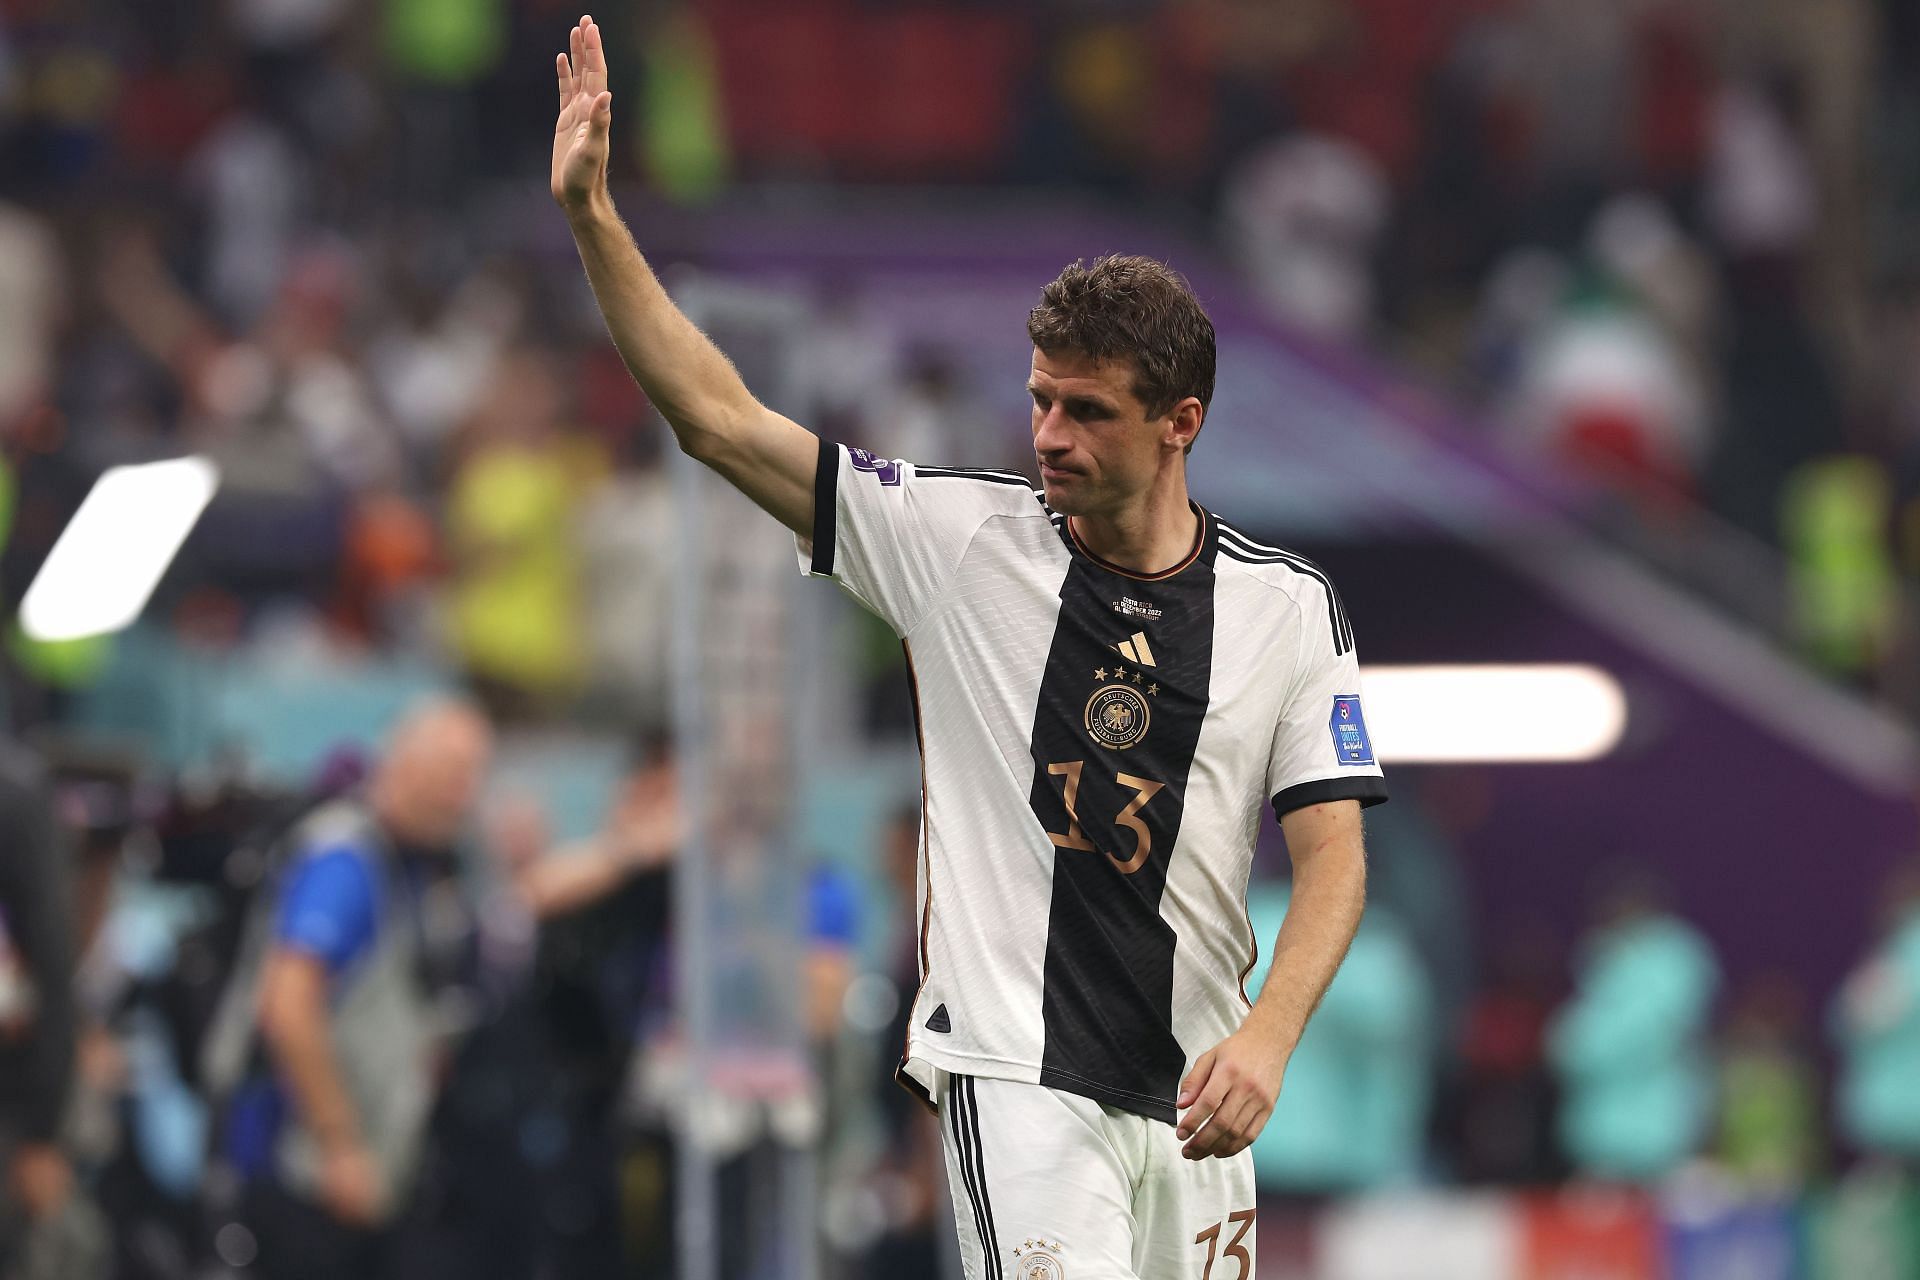 Muller could be waving goodbye to his international career